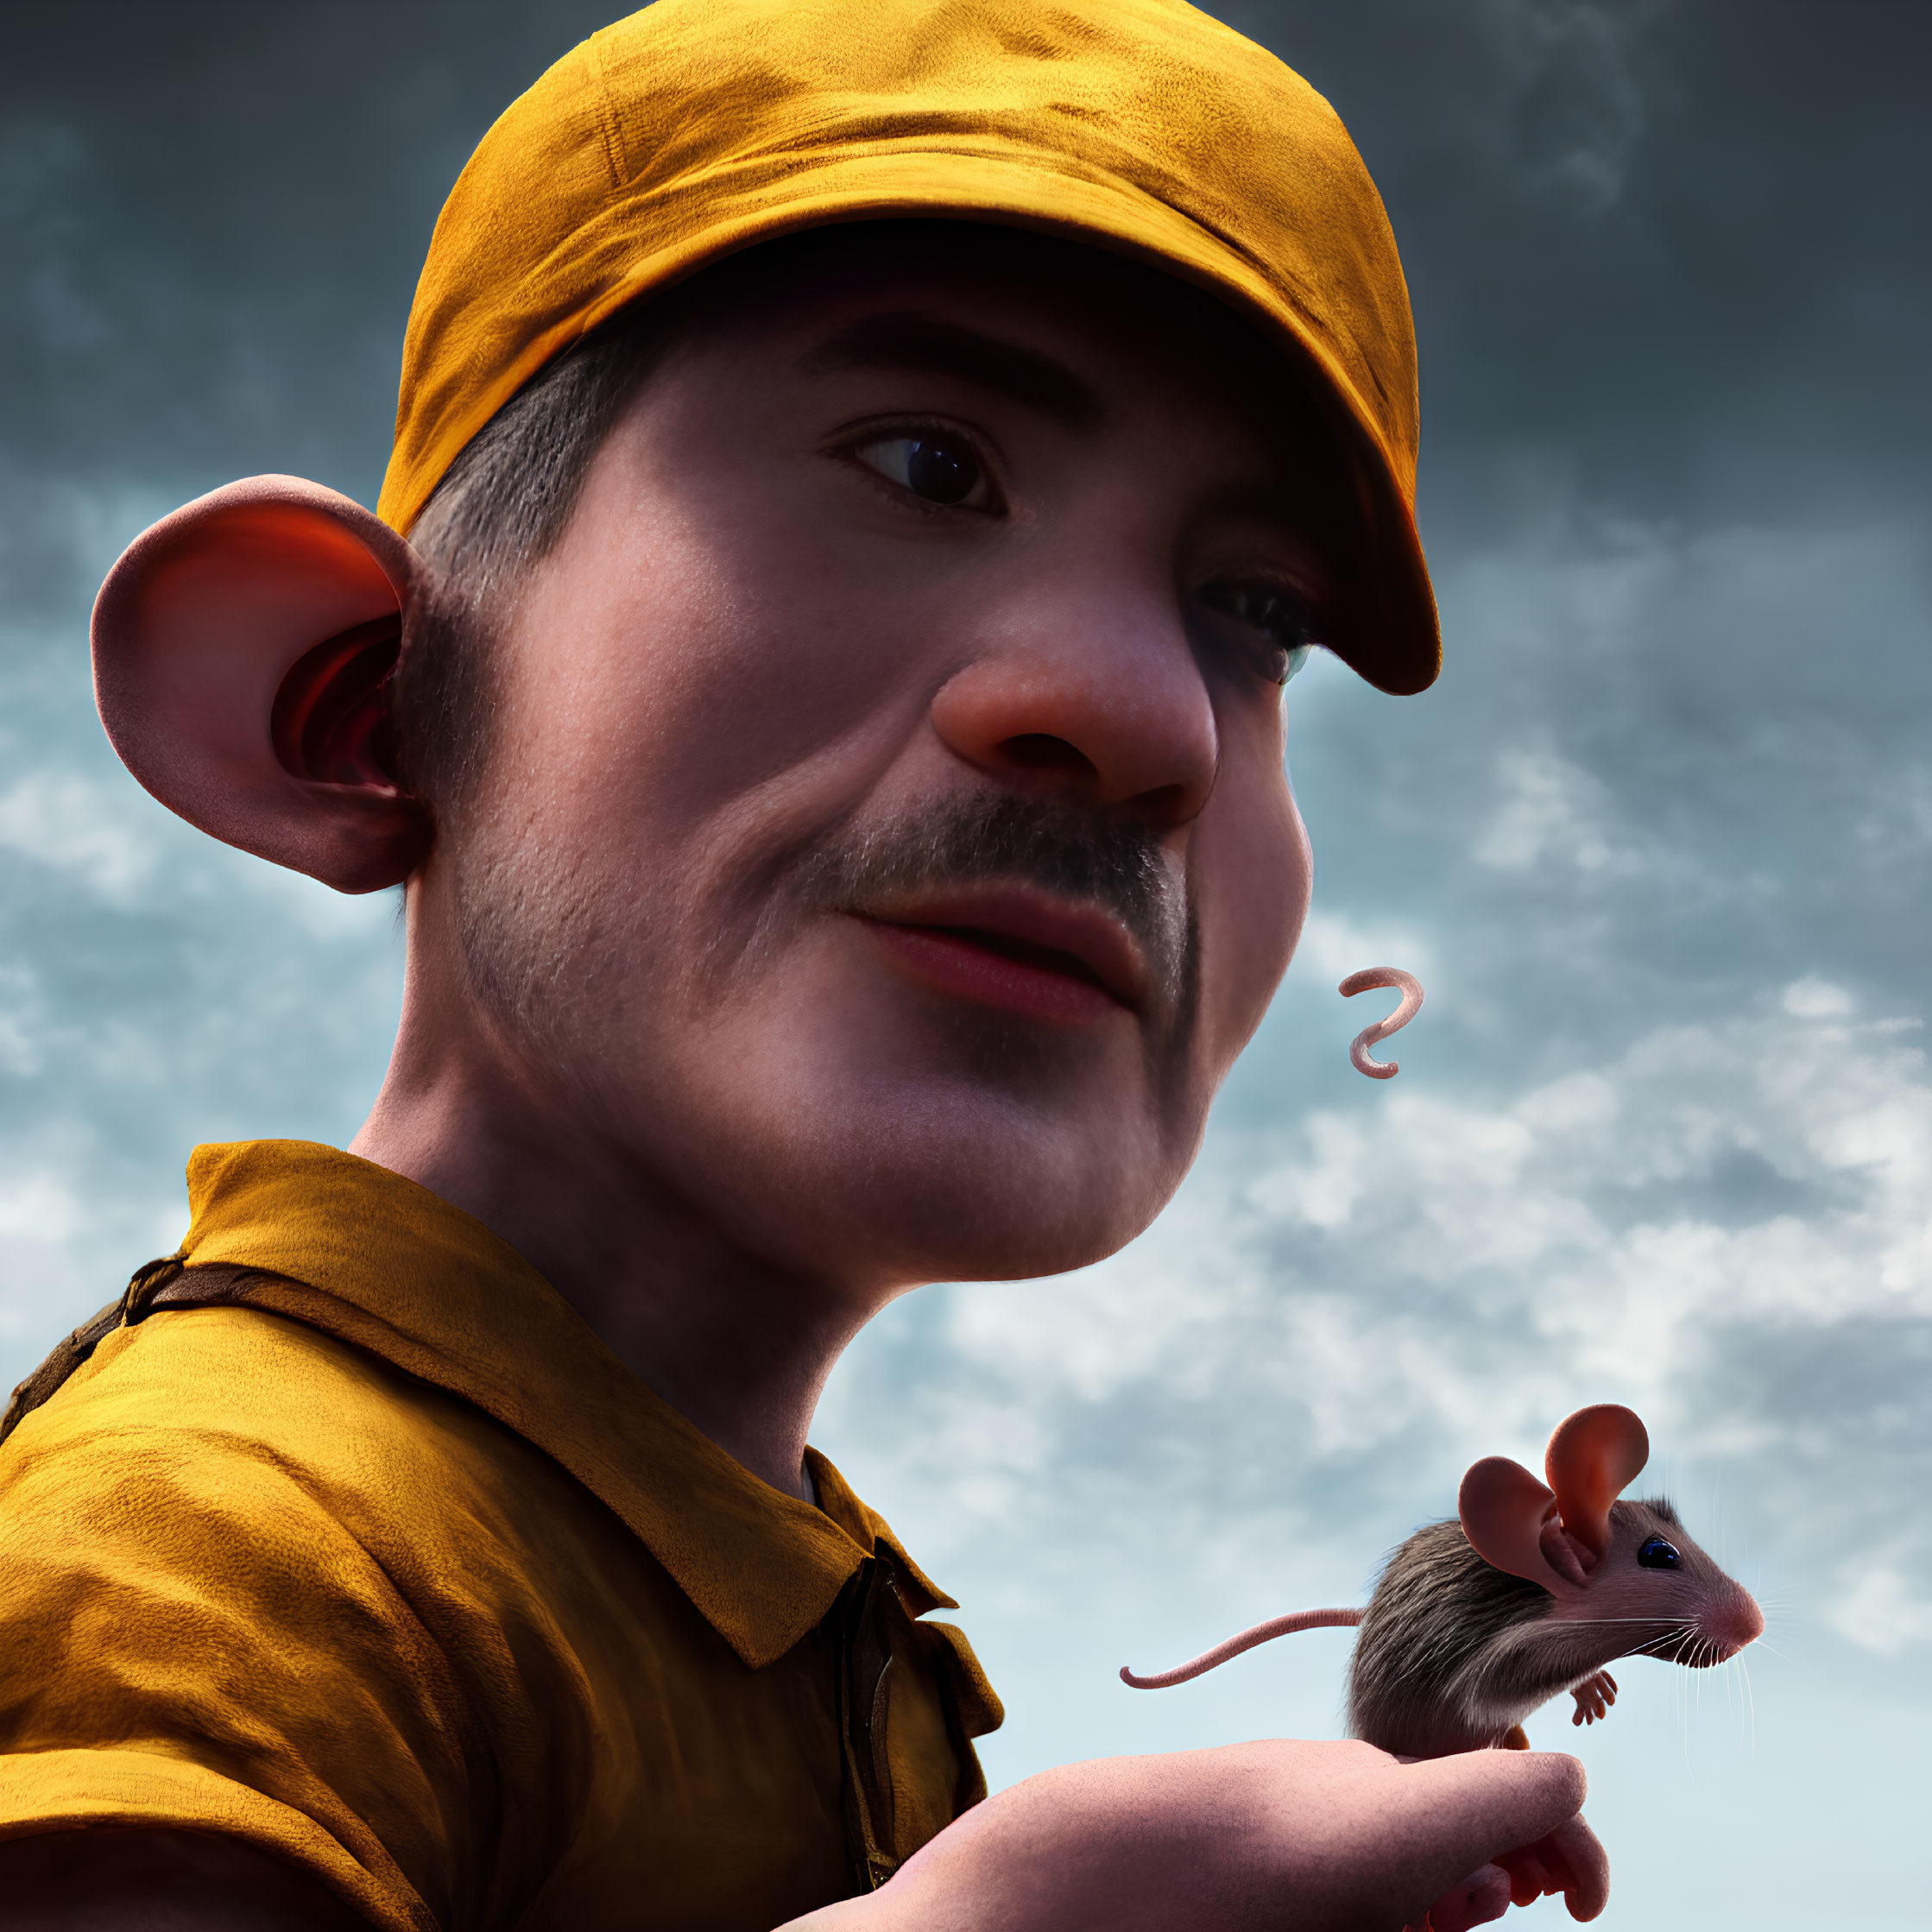 Man with Large Ears and Yellow Cap Holding Mouse Under Cloudy Sky